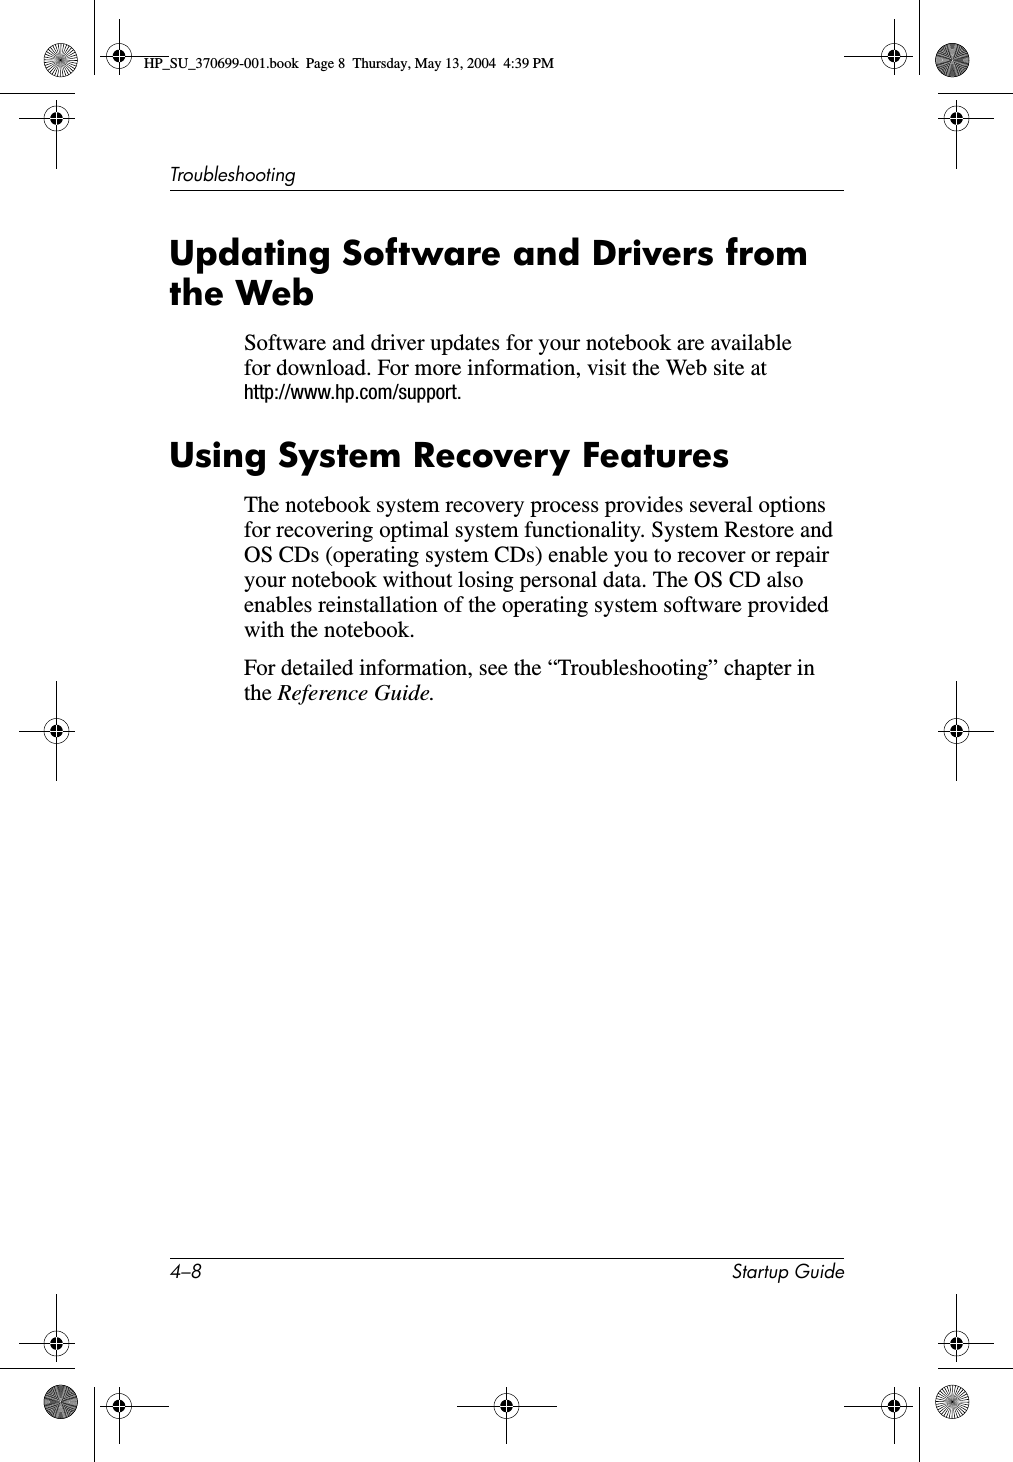 4–8 Startup GuideTroubleshootingUpdating Software and Drivers from the WebSoftware and driver updates for your notebook are available for download. For more information, visit the Web site at http://www.hp.com/support.Using System Recovery FeaturesThe notebook system recovery process provides several options for recovering optimal system functionality. System Restore and OS CDs (operating system CDs) enable you to recover or repair your notebook without losing personal data. The OS CD also enables reinstallation of the operating system software provided with the notebook. For detailed information, see the “Troubleshooting” chapter in the Reference Guide.HP_SU_370699-001.book  Page 8  Thursday, May 13, 2004  4:39 PM